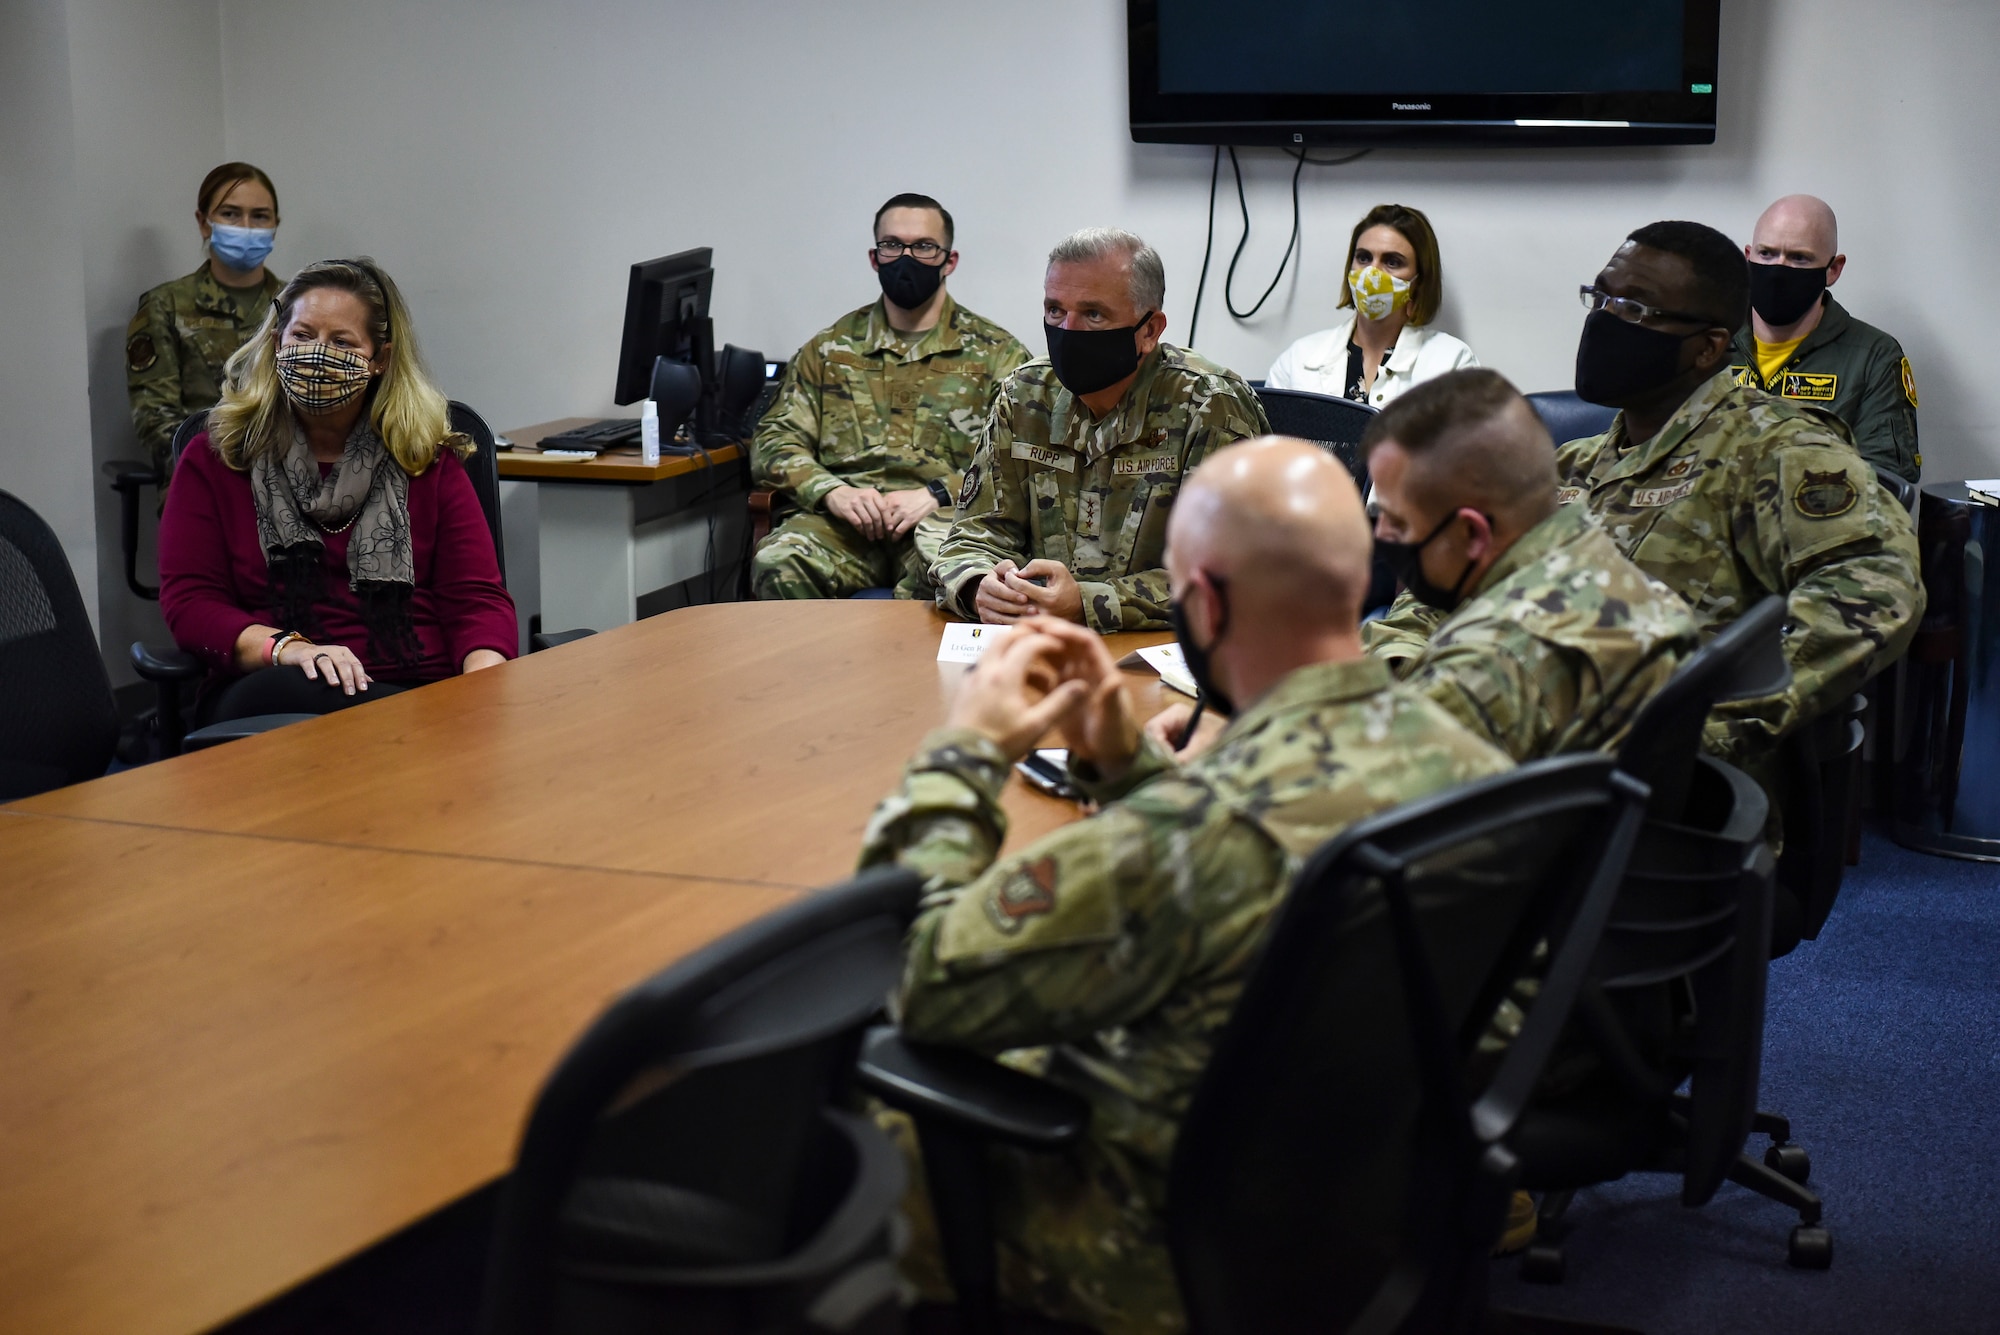 Group of military members in uniform sit in a conference room during a brief.